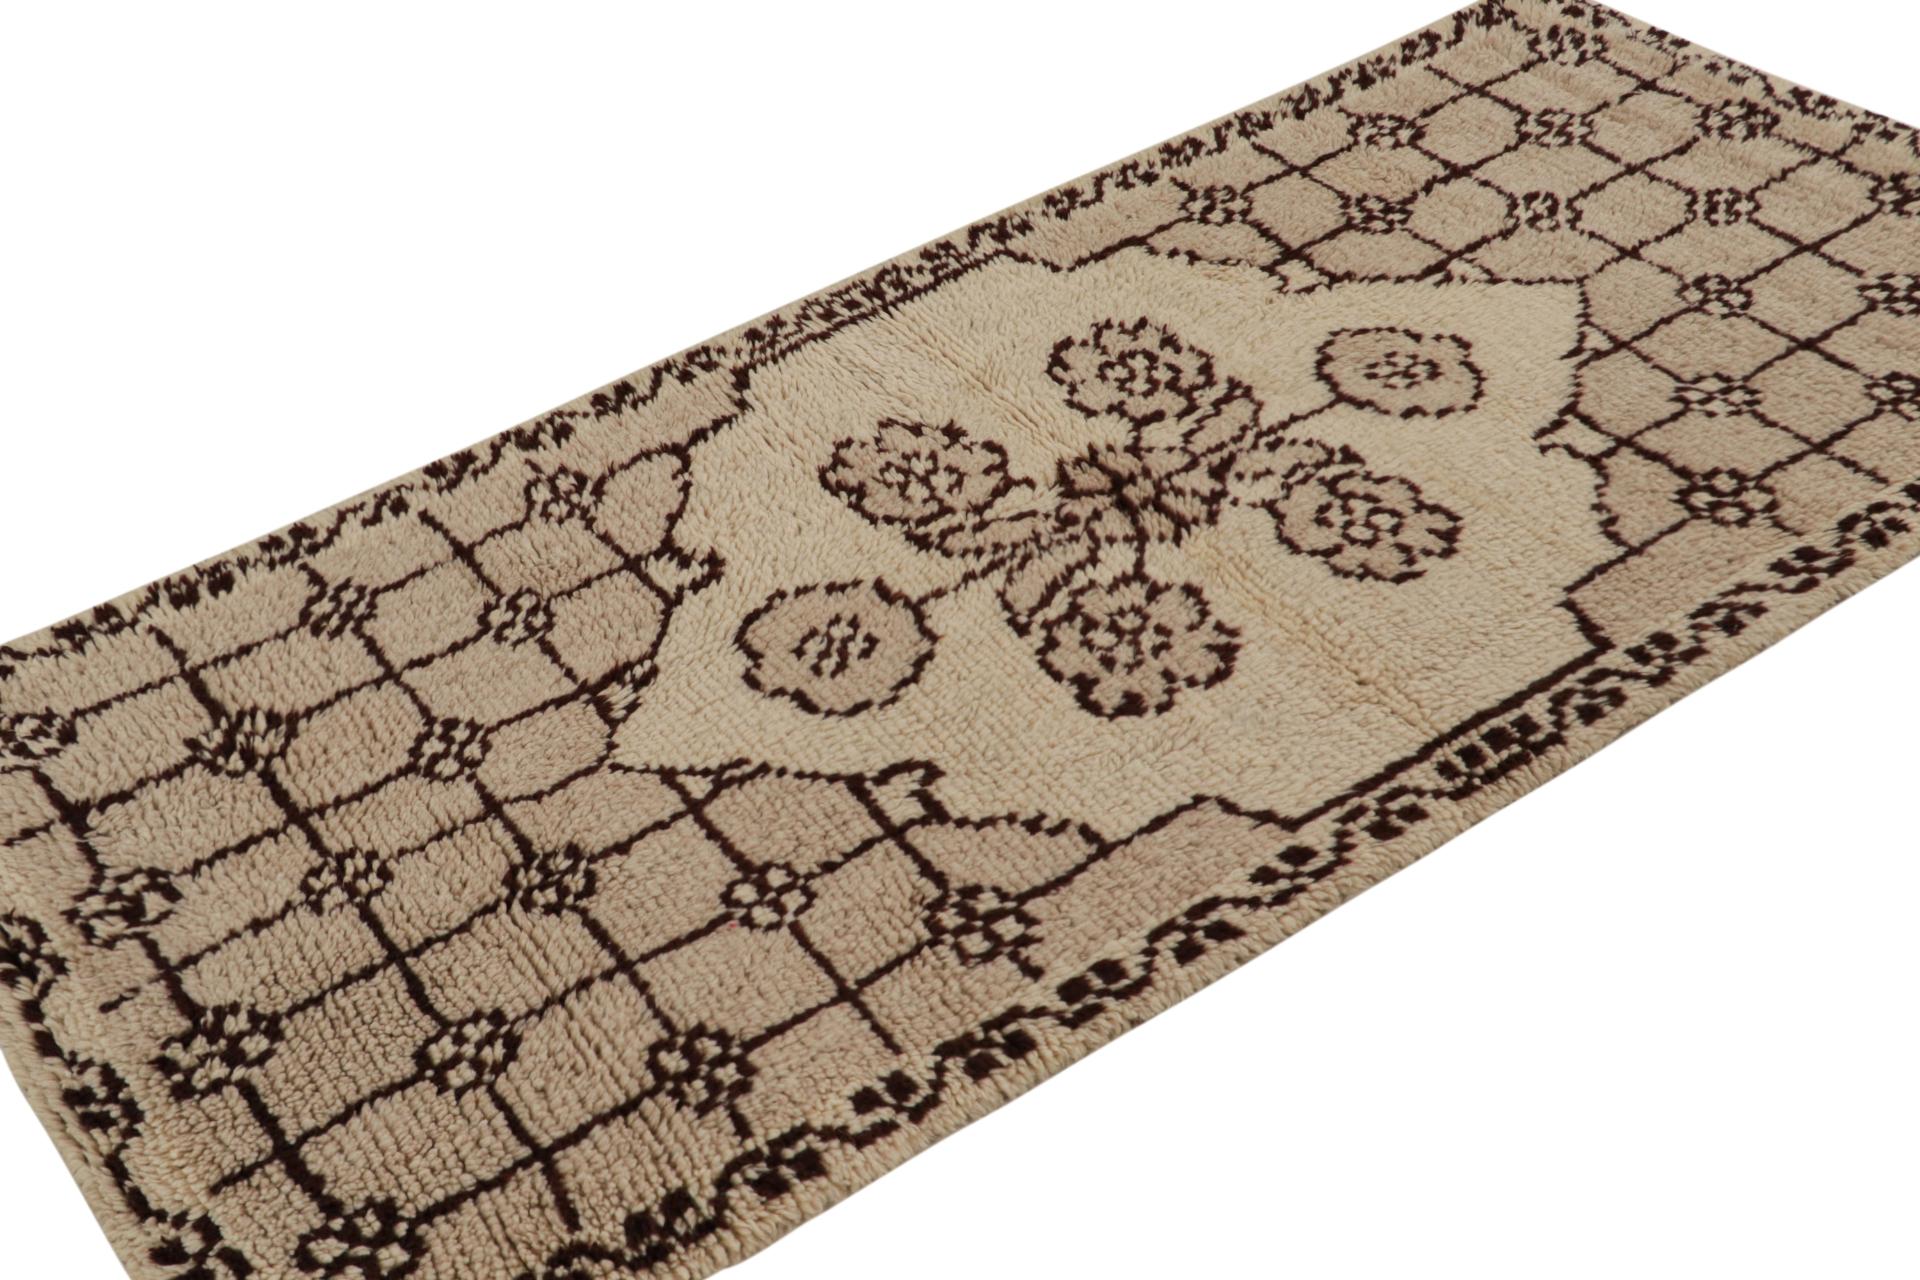 Hand-knotted in wool, this 3x7 vintage Tulu runner rug, circa 1950-1960, is among the family of Tulus with minimalist medallion and floral geometric patterns, as seen in the rich taupe and black tones.  

On the Design: 

Tulus are some of the most